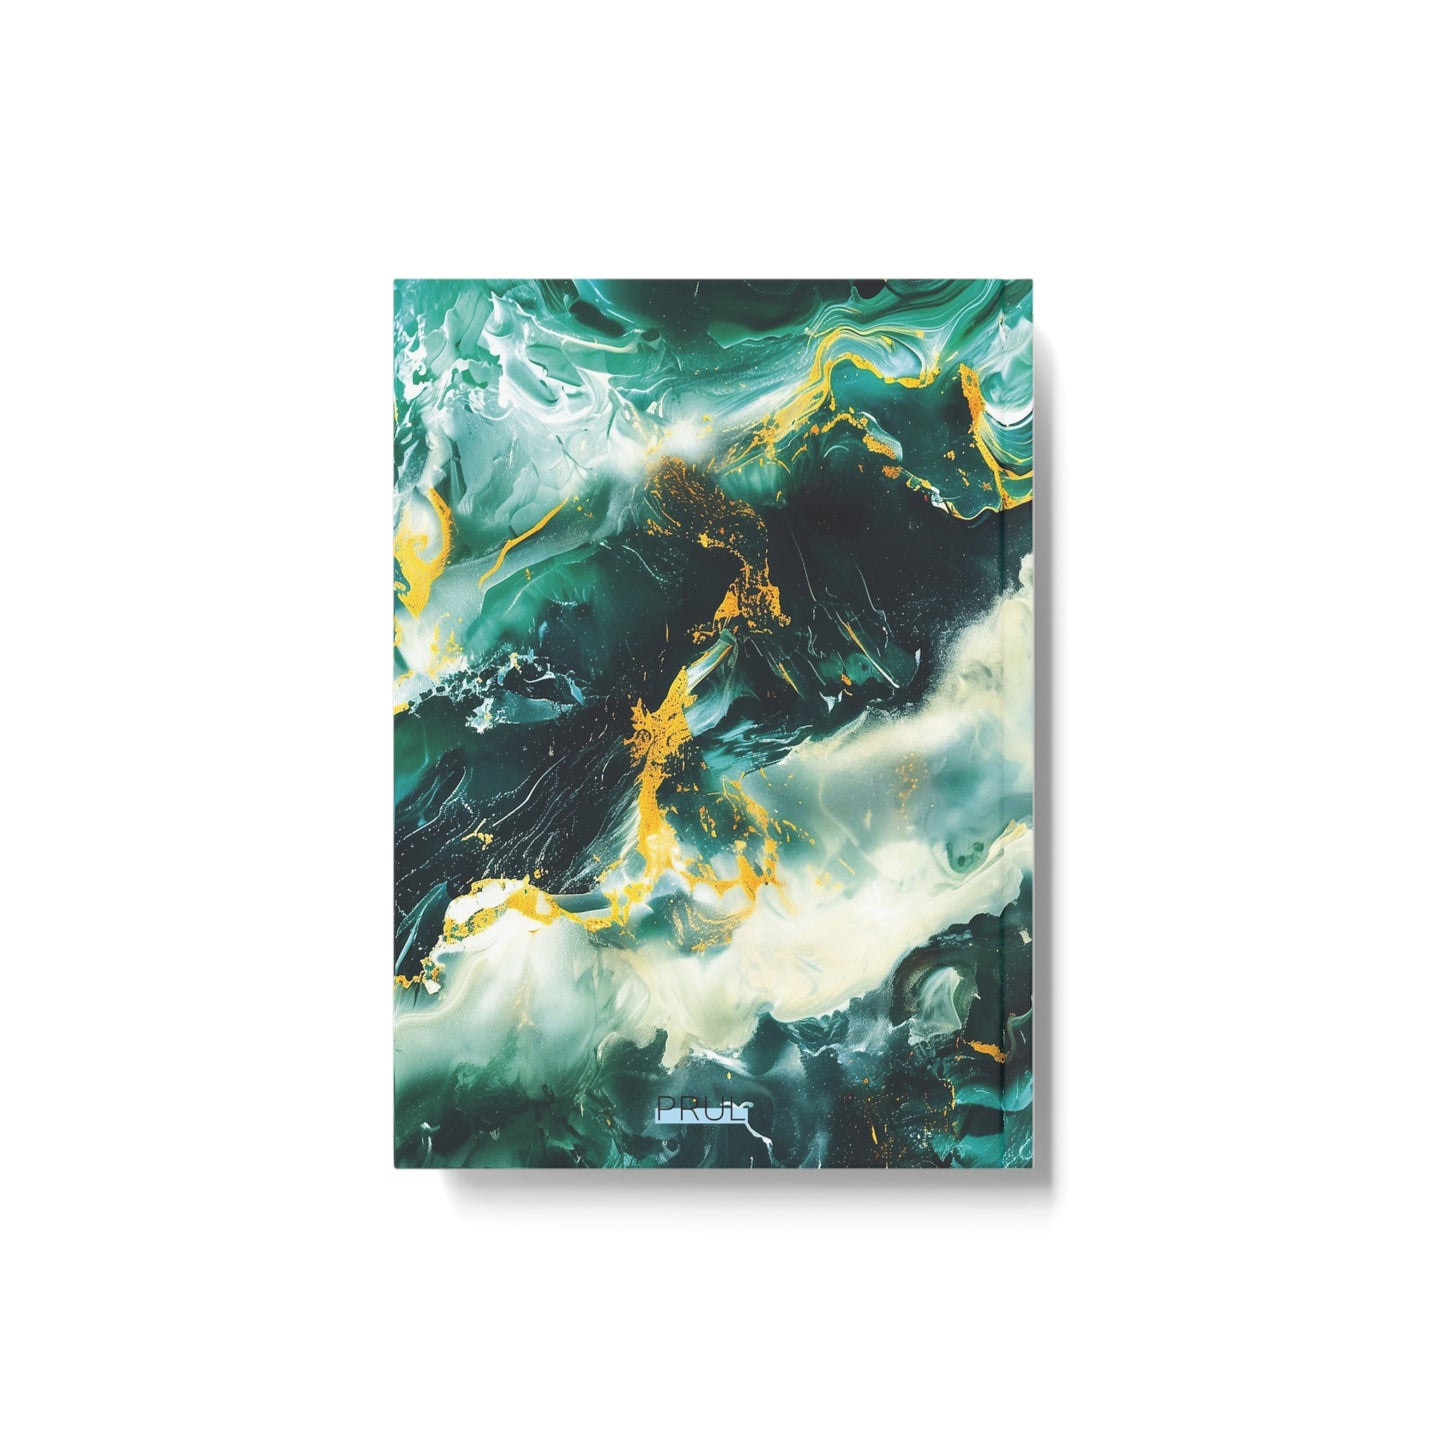 Green marble - Notebook